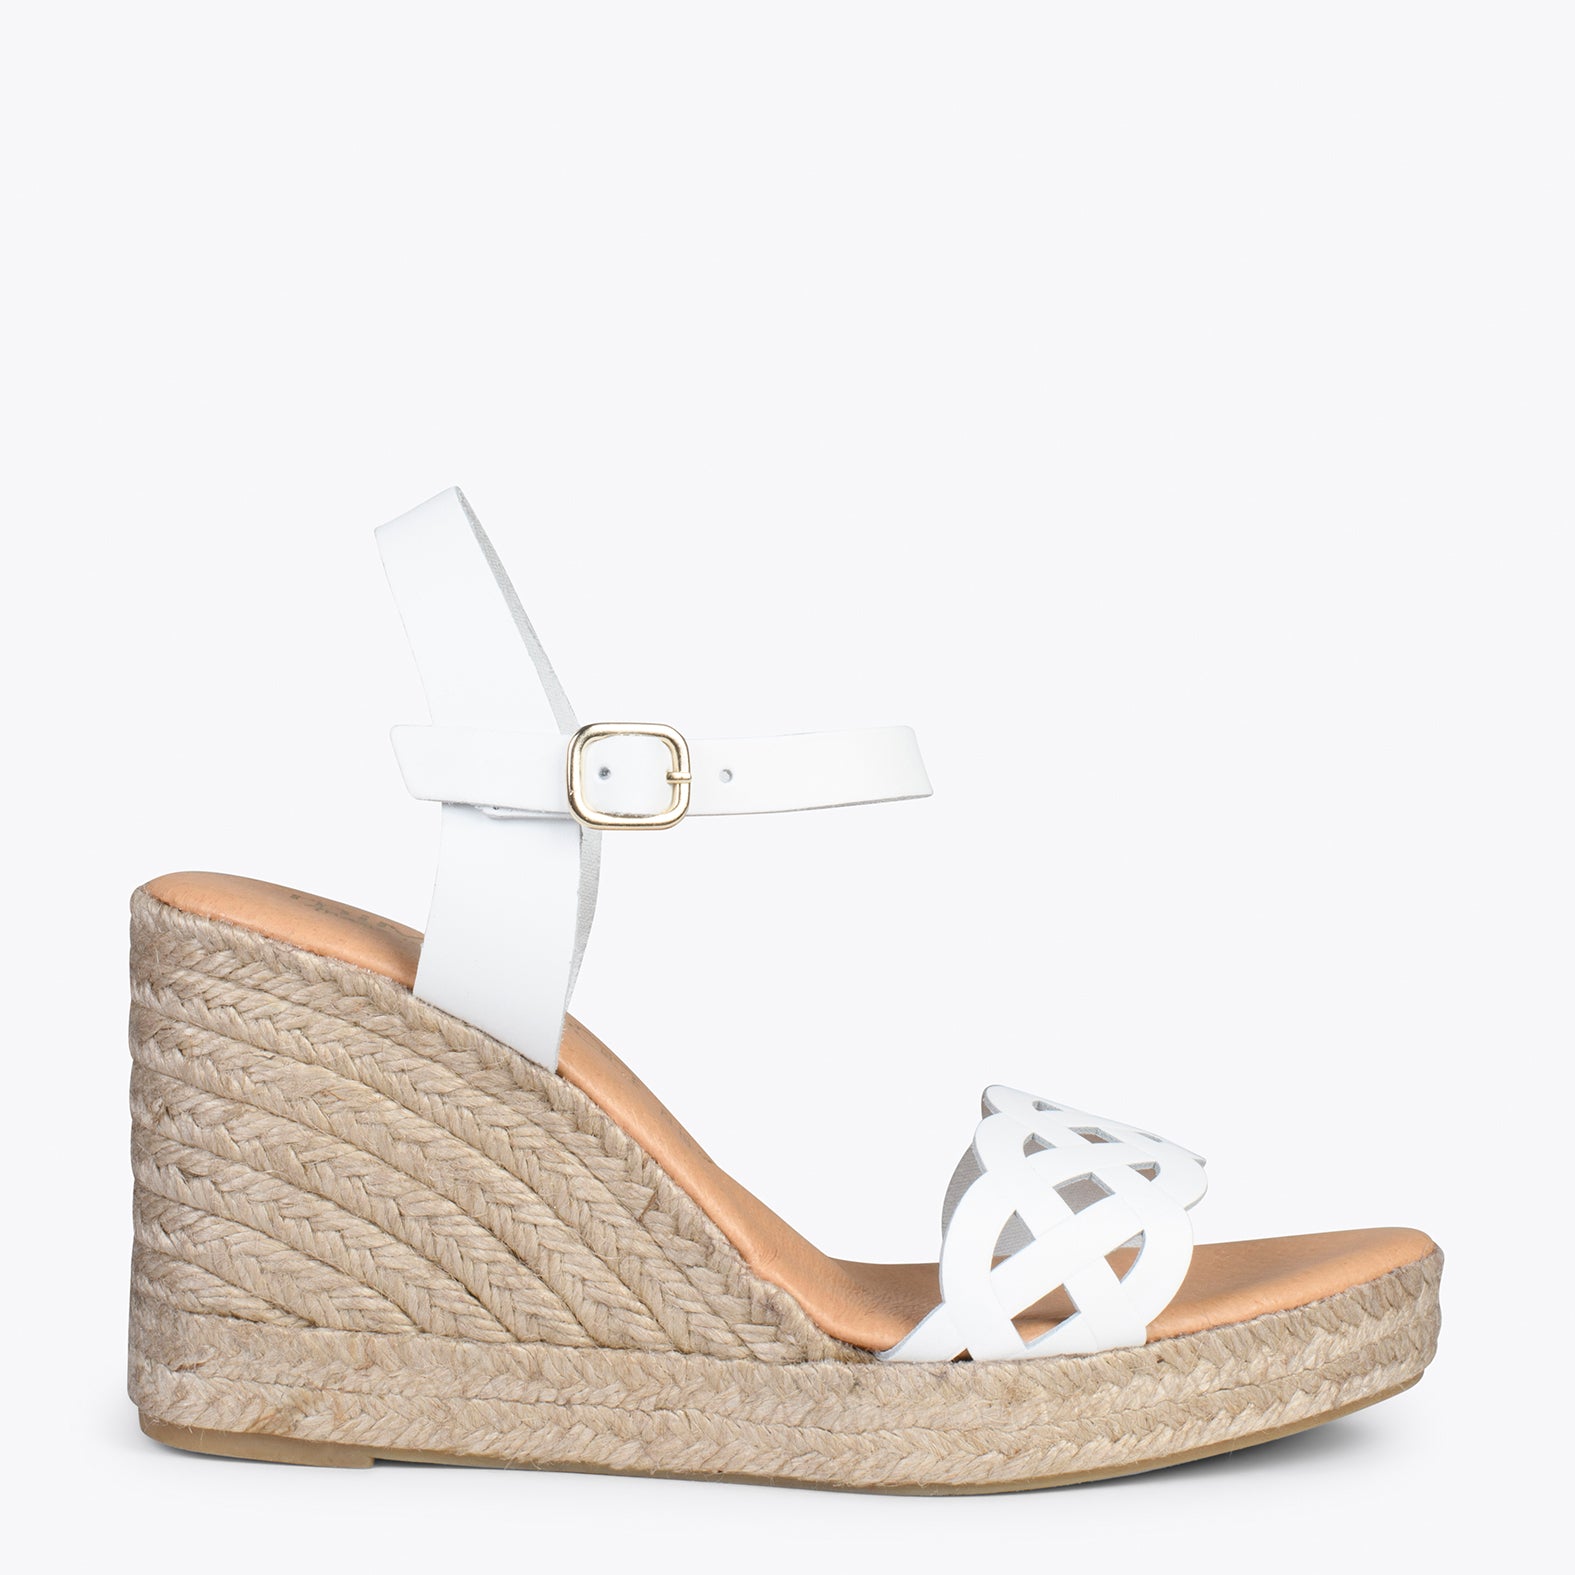 OASIS – WHITE espadrille wedges with braided front